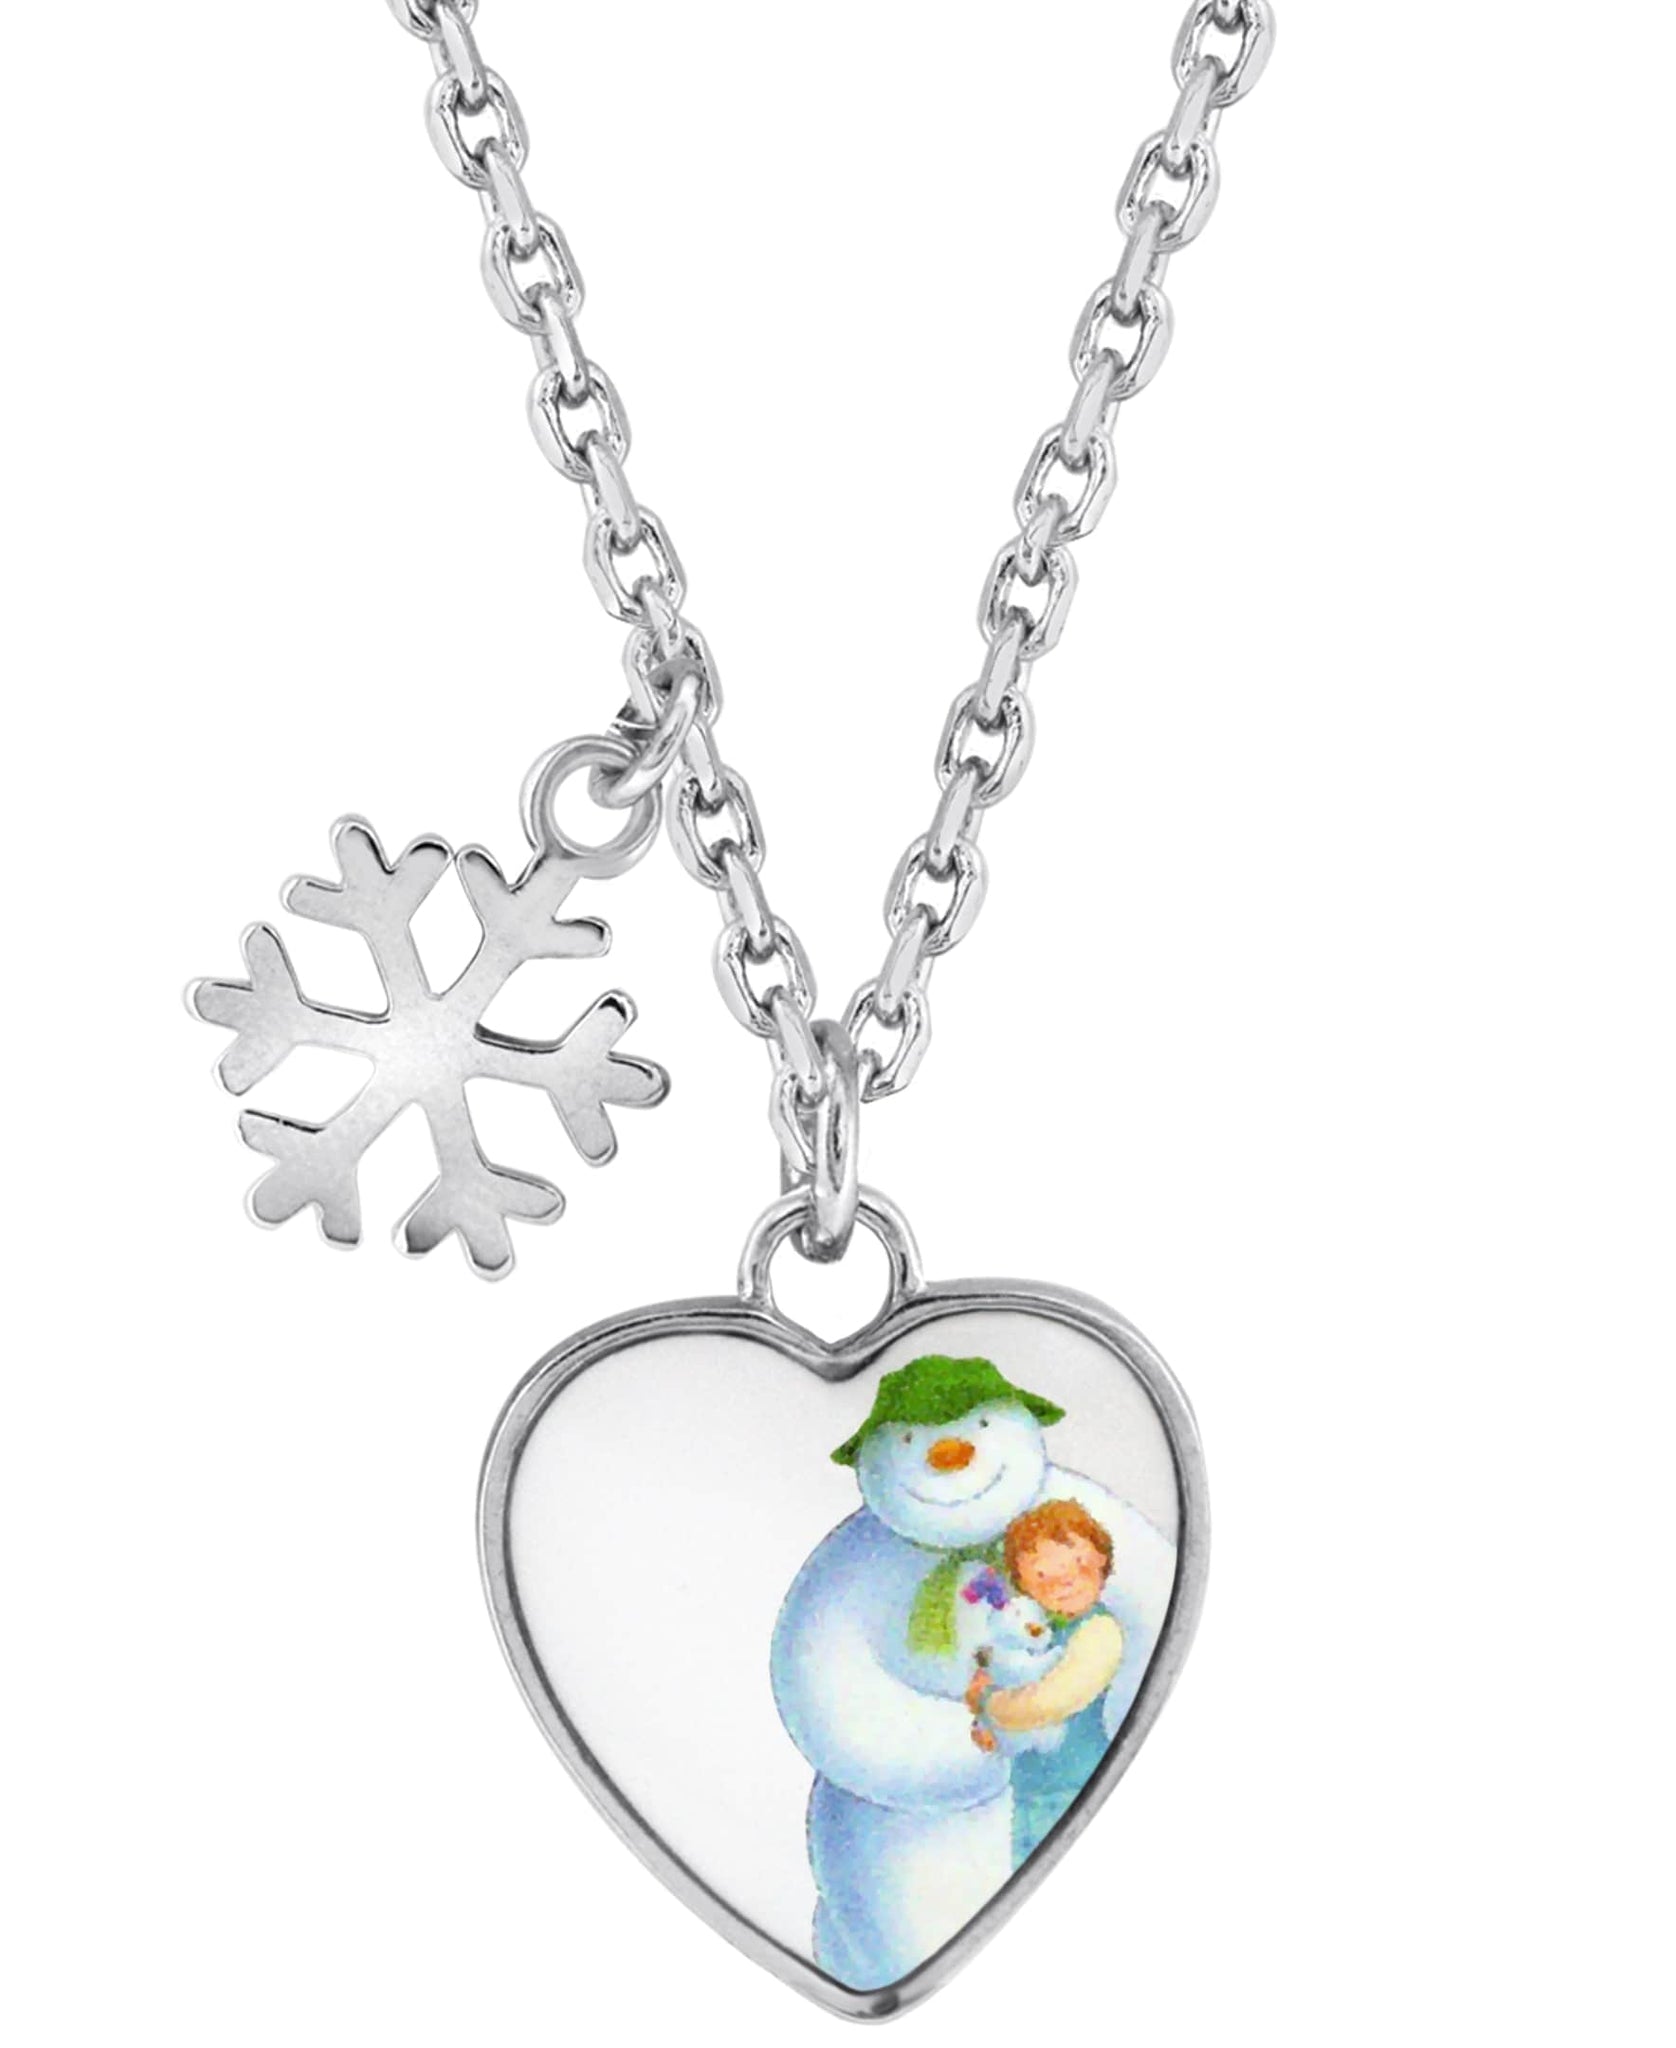 Snowman Snowflake and Heart Pendant Necklace - Rhona Sutton Jewellery